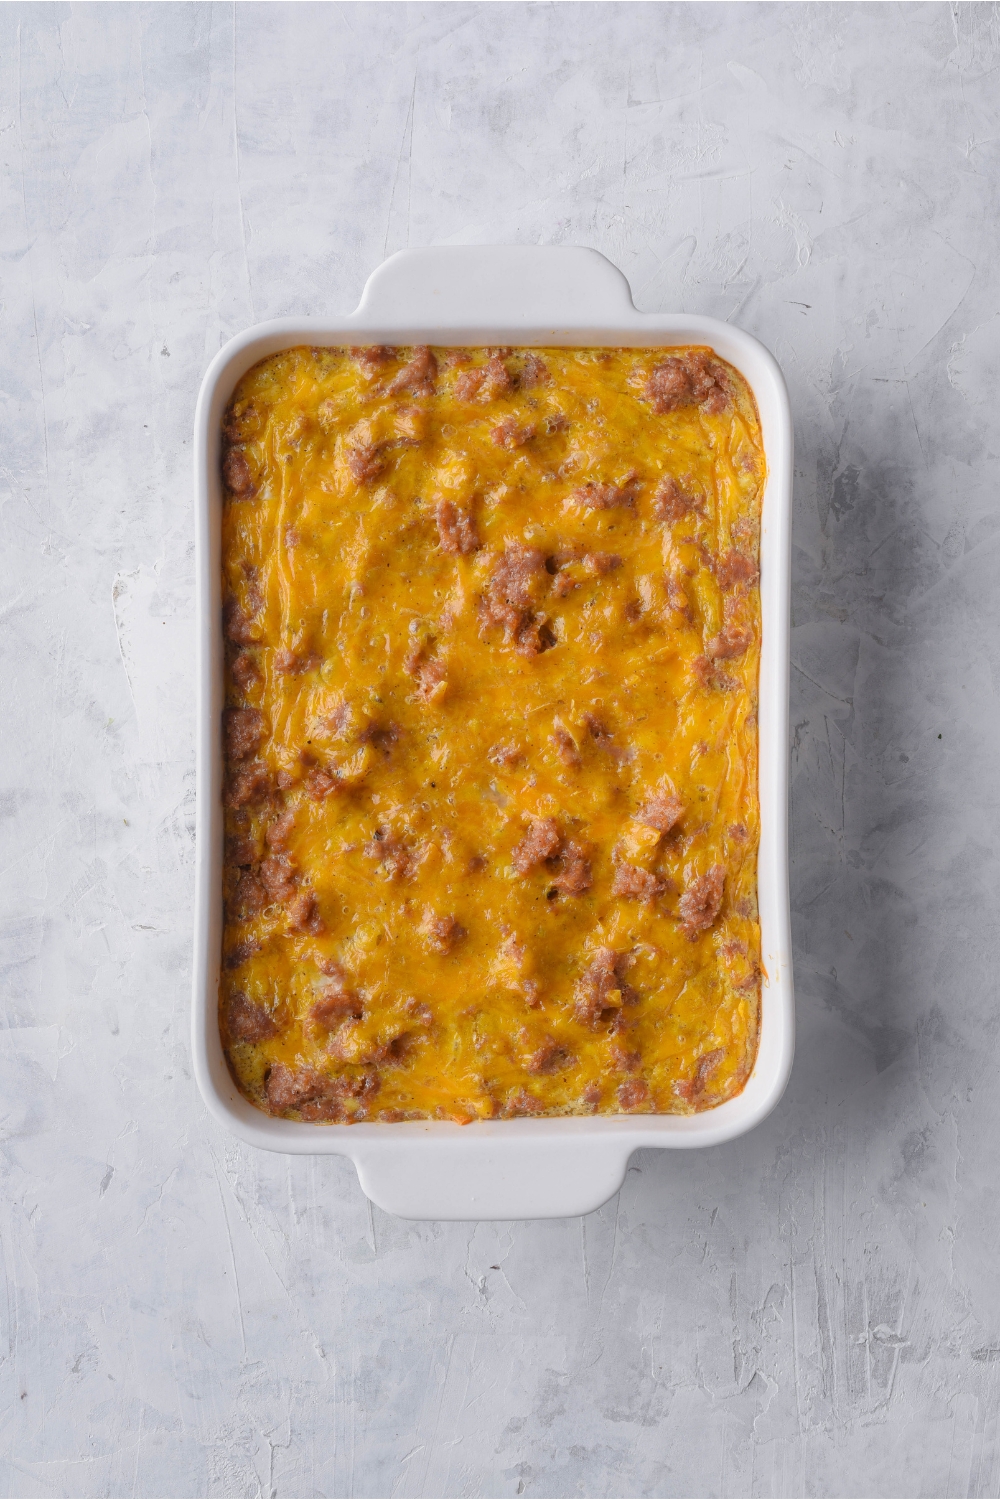 Overhead view of a cooked breakfast casserole in a white baking dish.